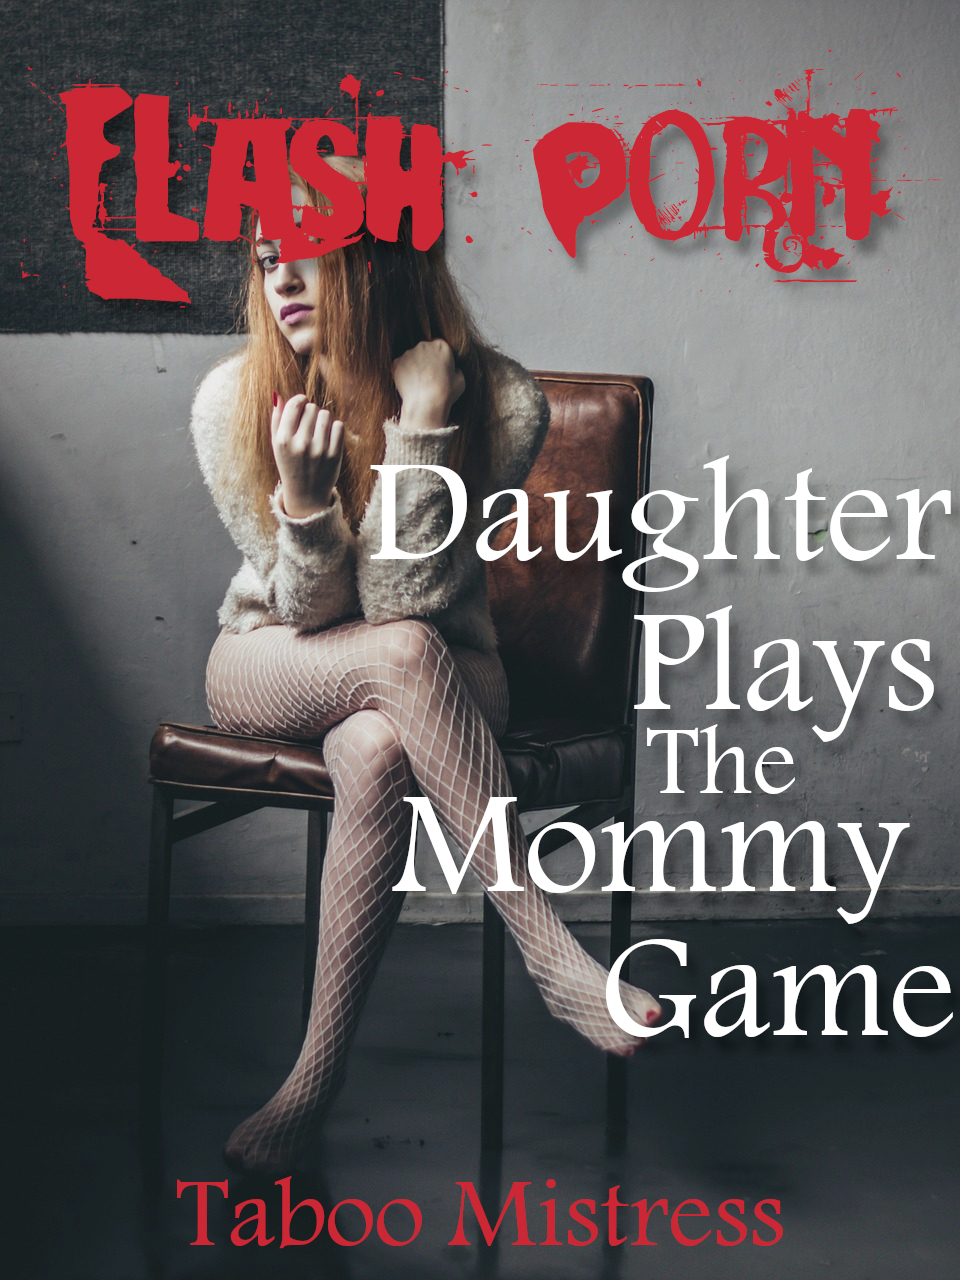 Ageplay Porn Captions - Flash Porn: Daughter Plays the Mommy Game, an Ebook by Taboo Mistress